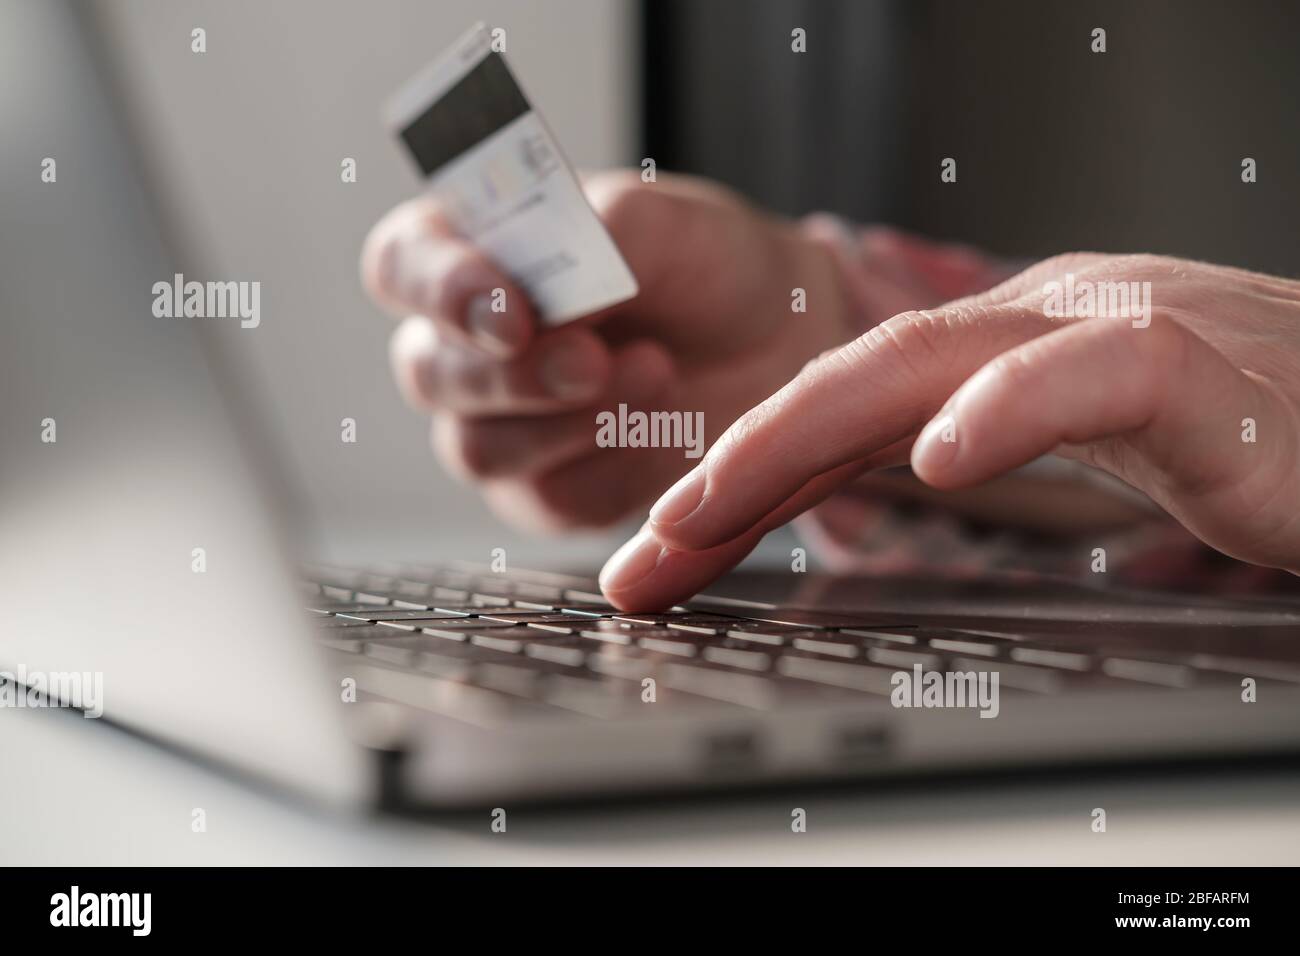 Female hands enter bank details of a credit card on a laptop to pay for online purchases. Concept of self-isolation due to a virus epidemic. Modern Stock Photo